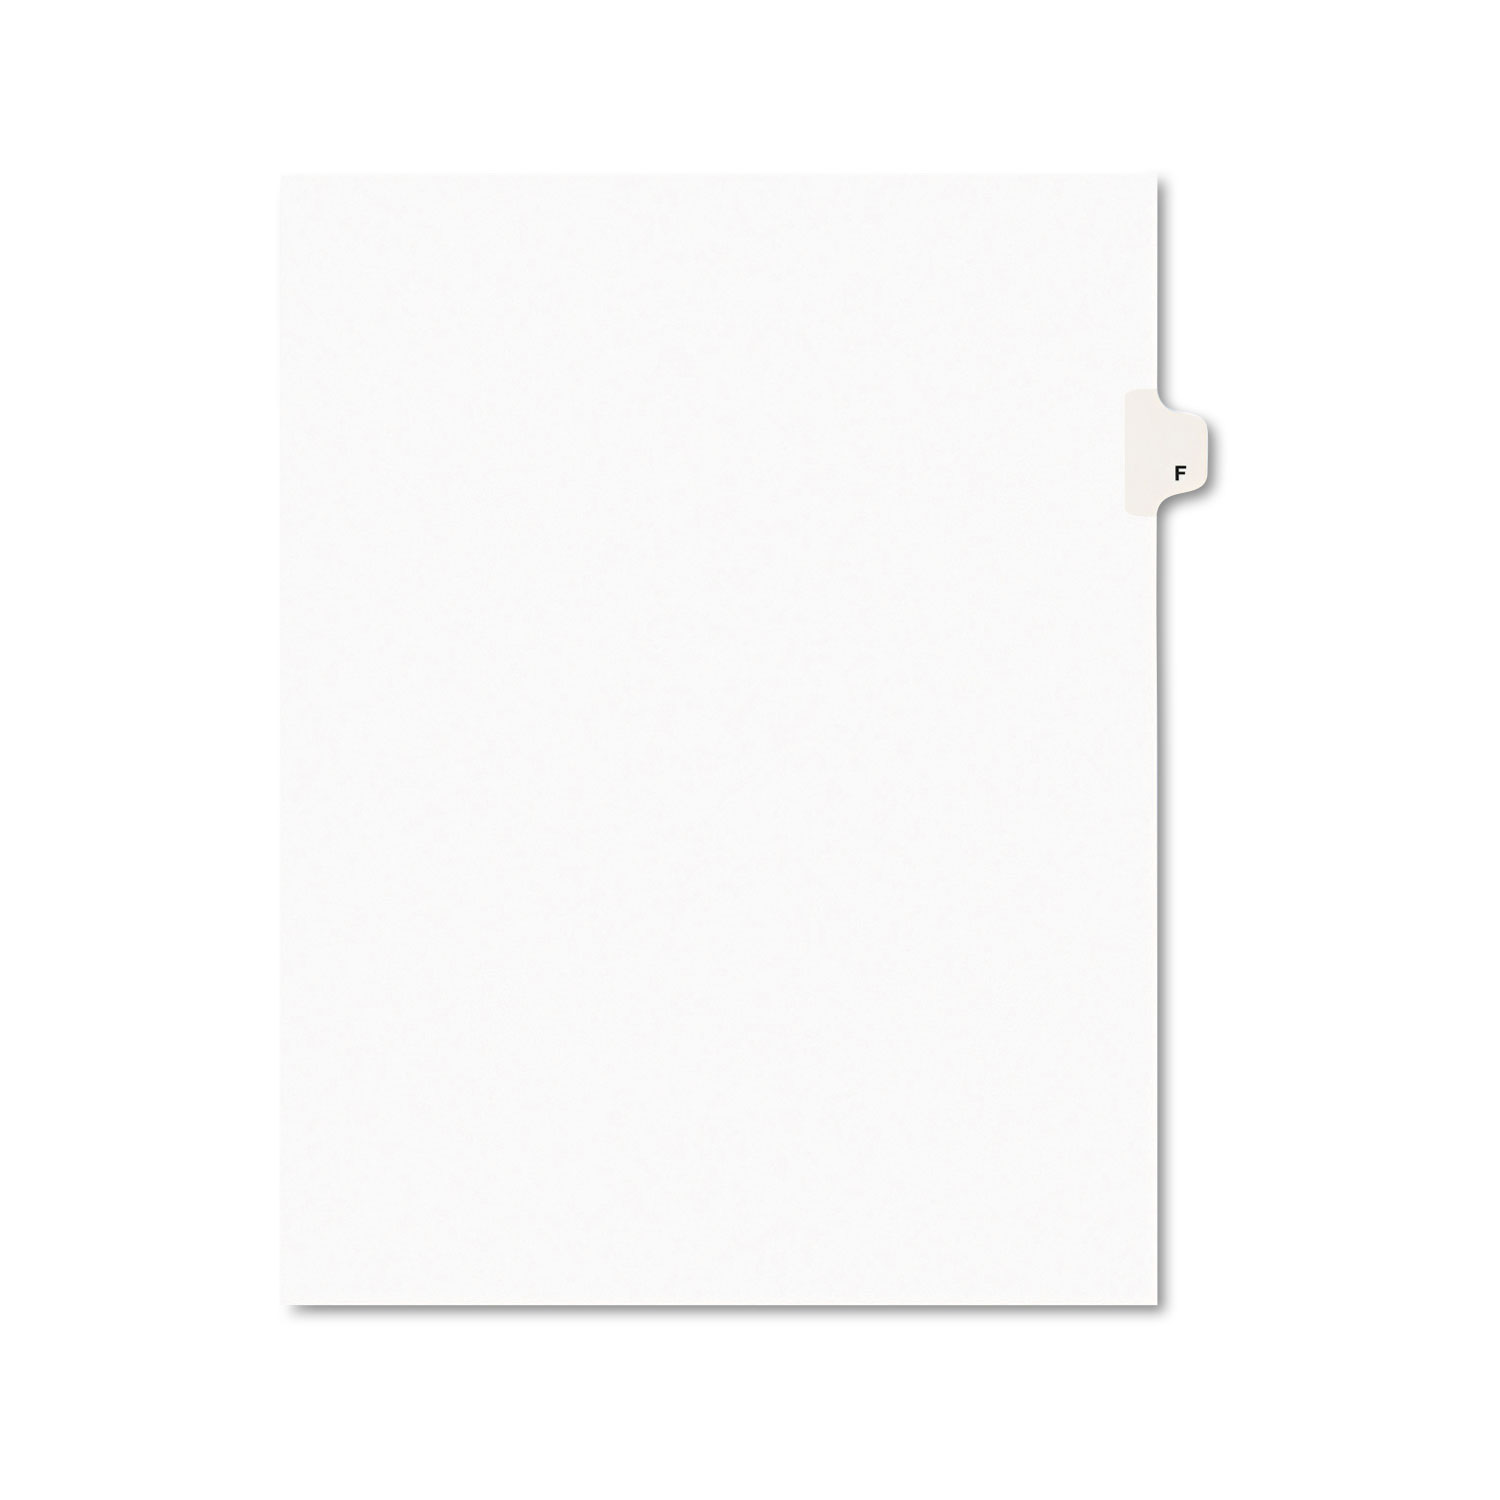  Avery 01406 Preprinted Legal Exhibit Side Tab Index Dividers, Avery Style, 26-Tab, F, 11 x 8.5, White, 25/Pack (AVE01406) 